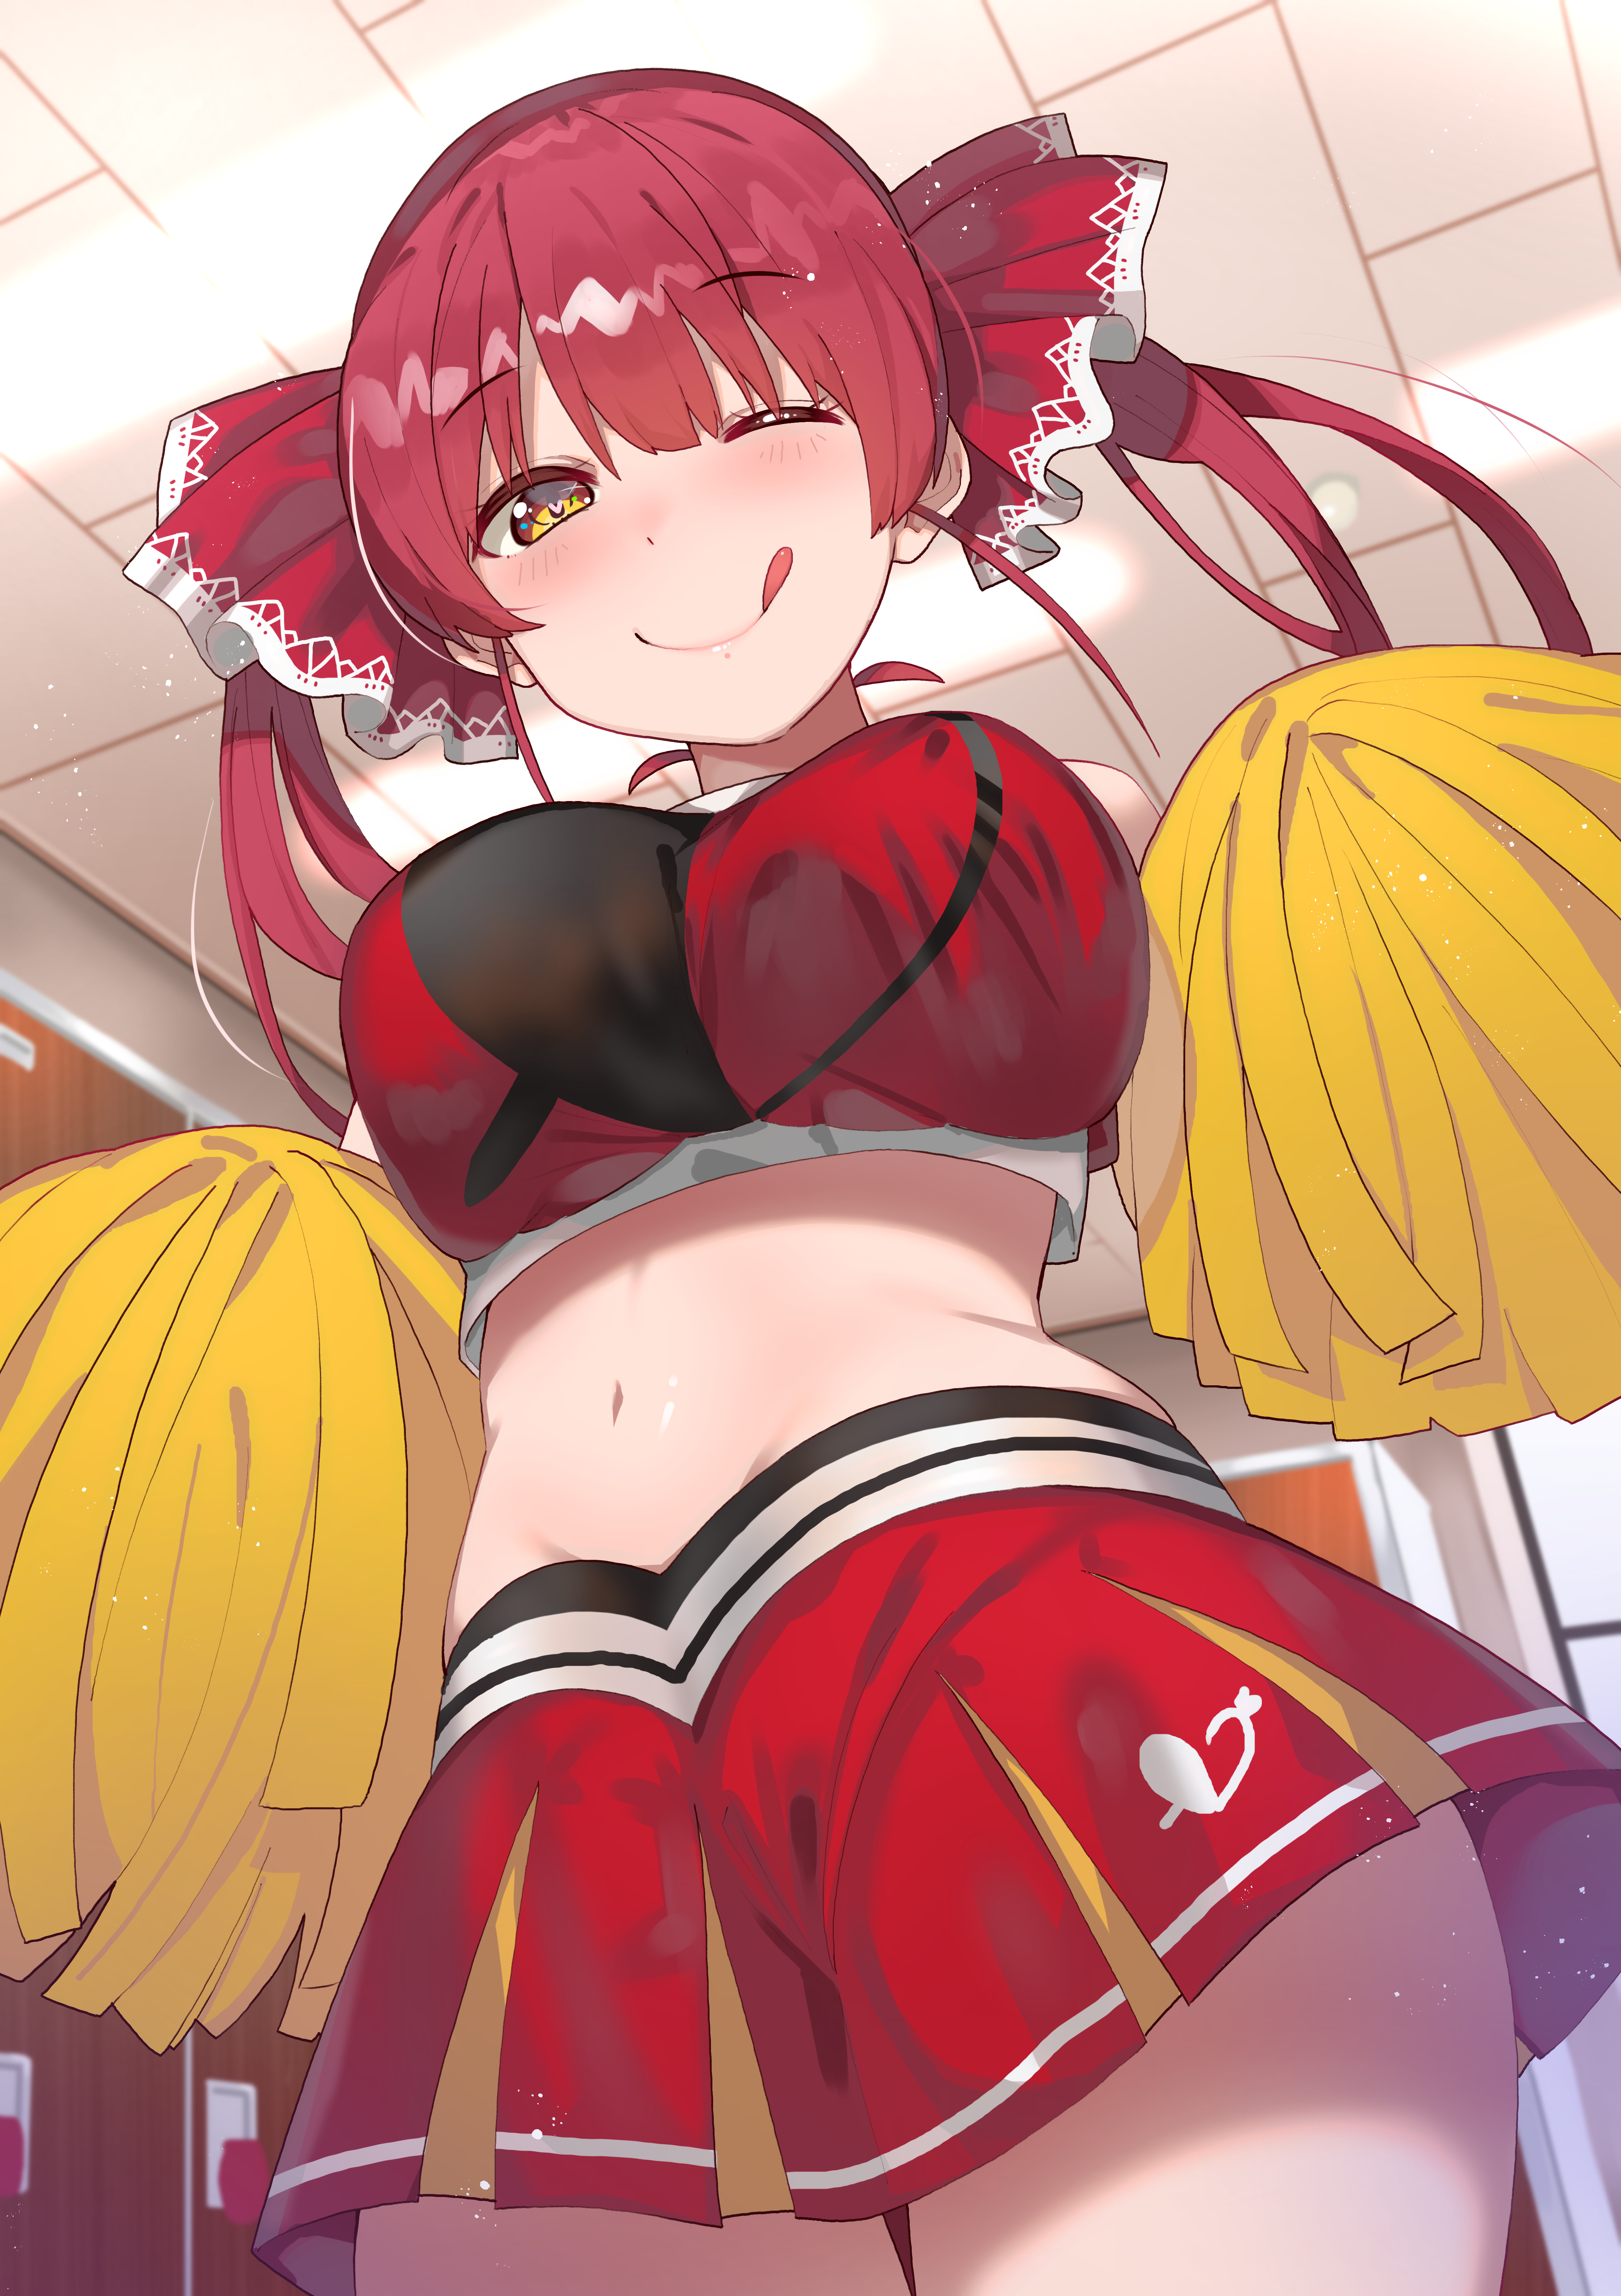 Anime 4553x6449 Houshou Marine Virtual Youtuber anime girls anime fan art redhead twintails hair accessories bangs wink looking at viewer blushing smiling low-angle cheerleaders red clothing miniskirt thighs belly curvy portrait display 2D artwork digital art illustration drawing Keru Hololive ecchi tongue out